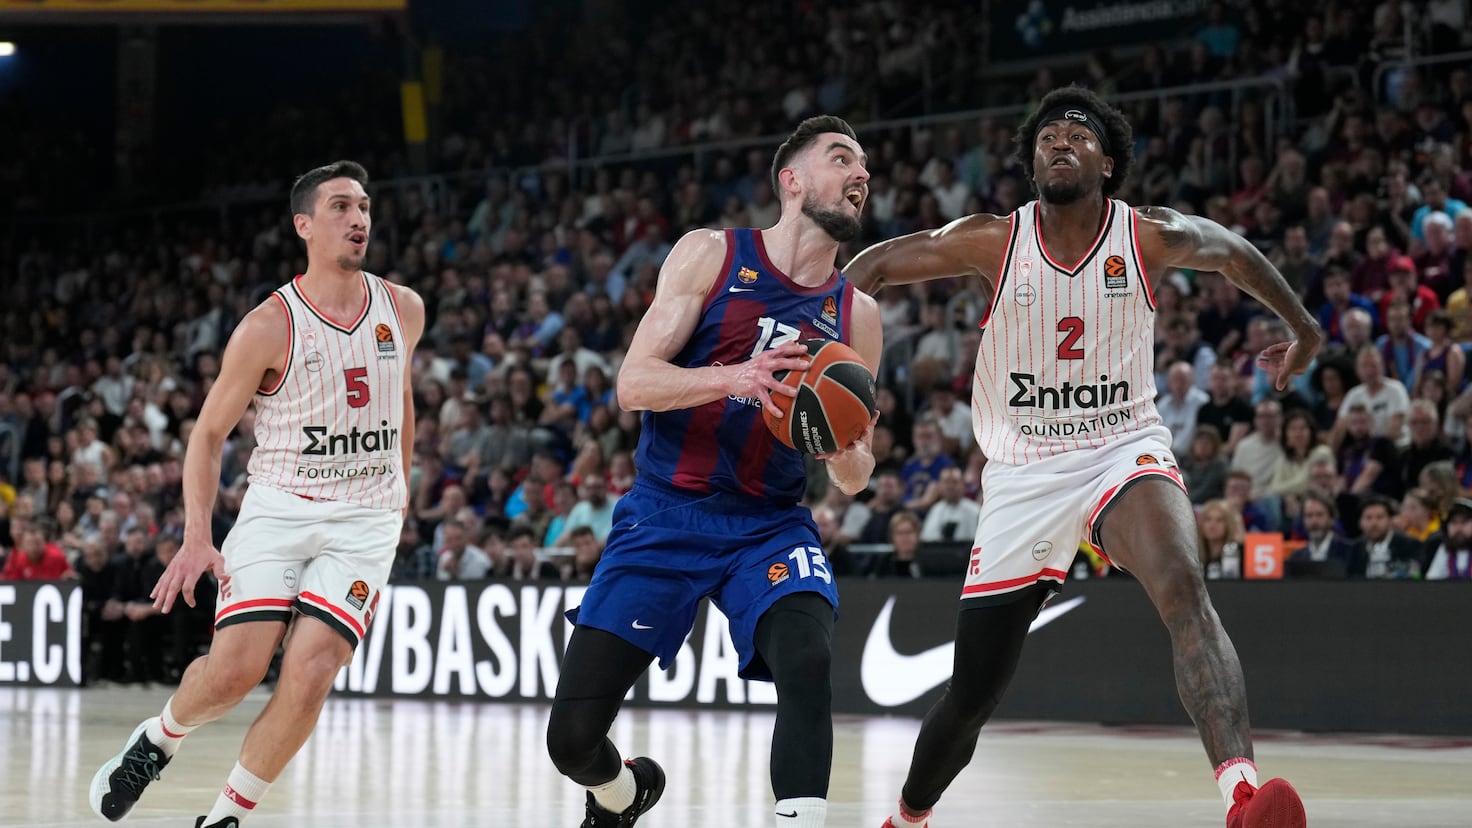 Barcelona Faces Do-or-Die Clash Against Olympiacos to Keep Final Four Dreams Alive